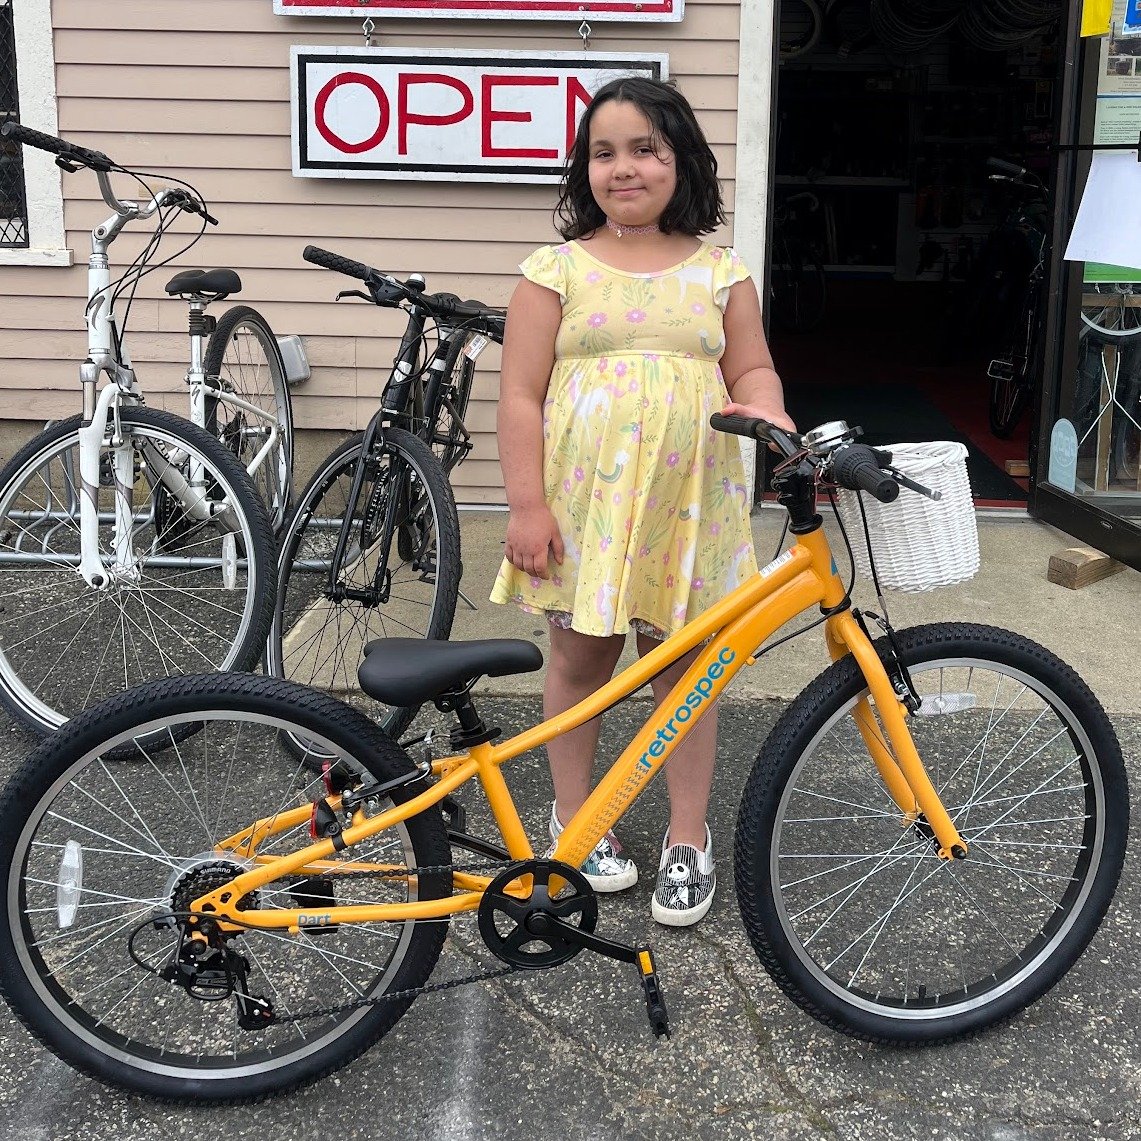 Kid Time Tuesday,

We had a really cool 24&quot; wheeled kids bike leave the shop. I really like the new color of Retrospec @retrospec 's &quot;Dart.&quot; I think they call it Saffron.

Also check out that cartoon bell!

We have something really spe